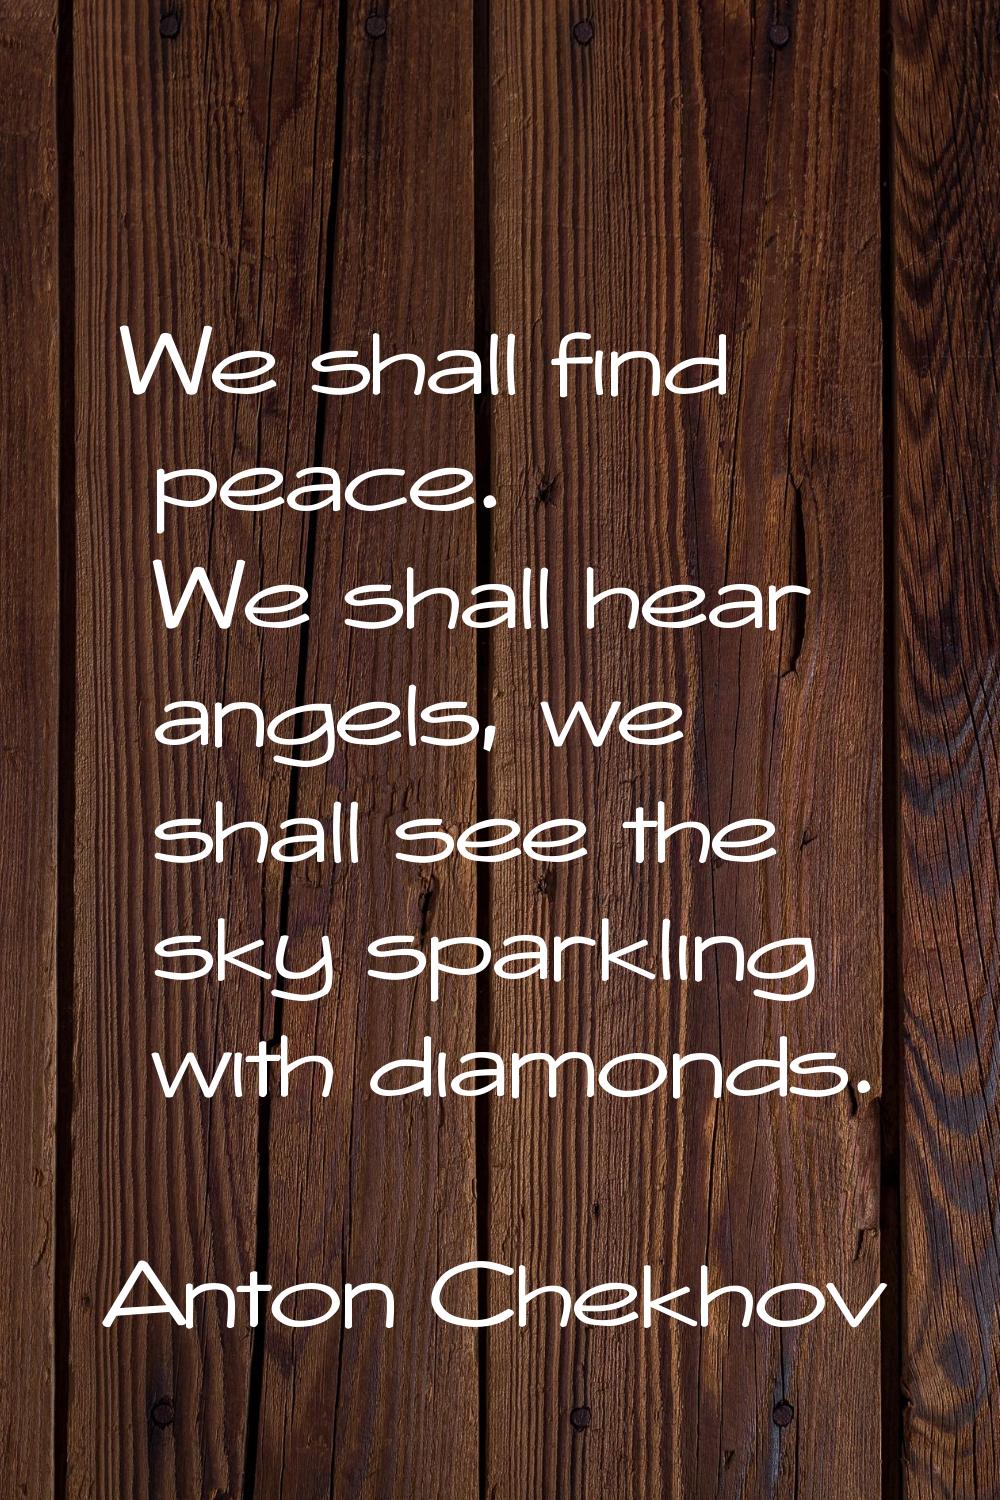 We shall find peace. We shall hear angels, we shall see the sky sparkling with diamonds.